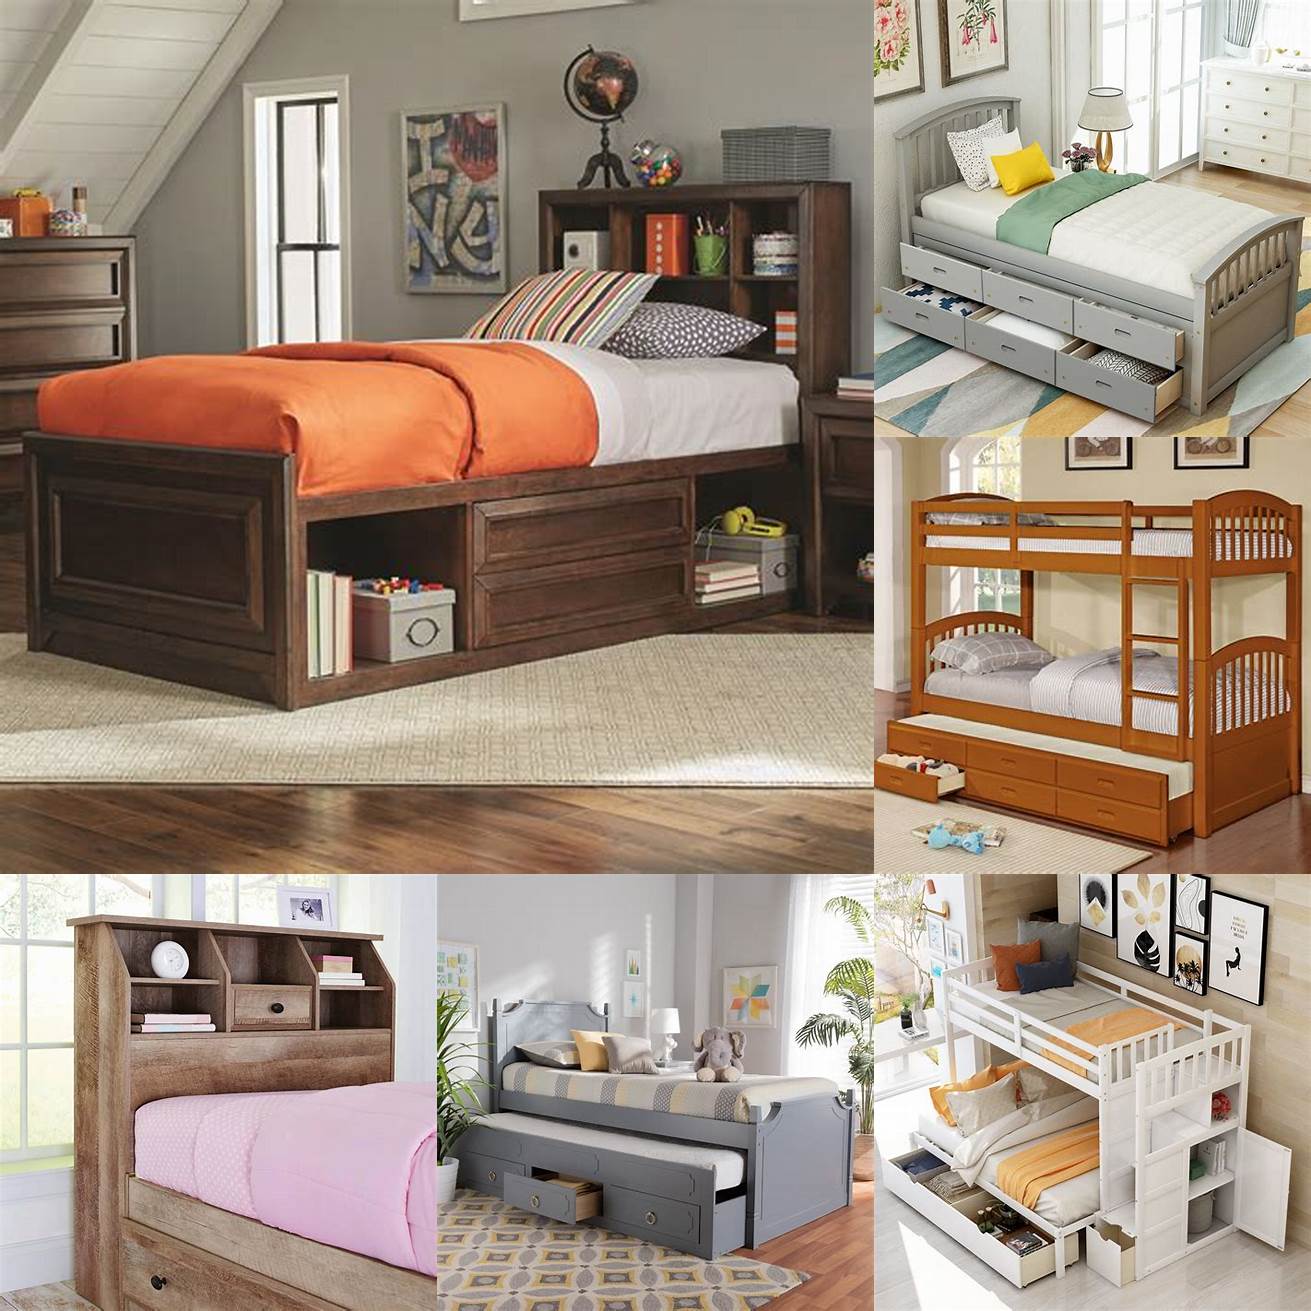 3 Twin bed with storage